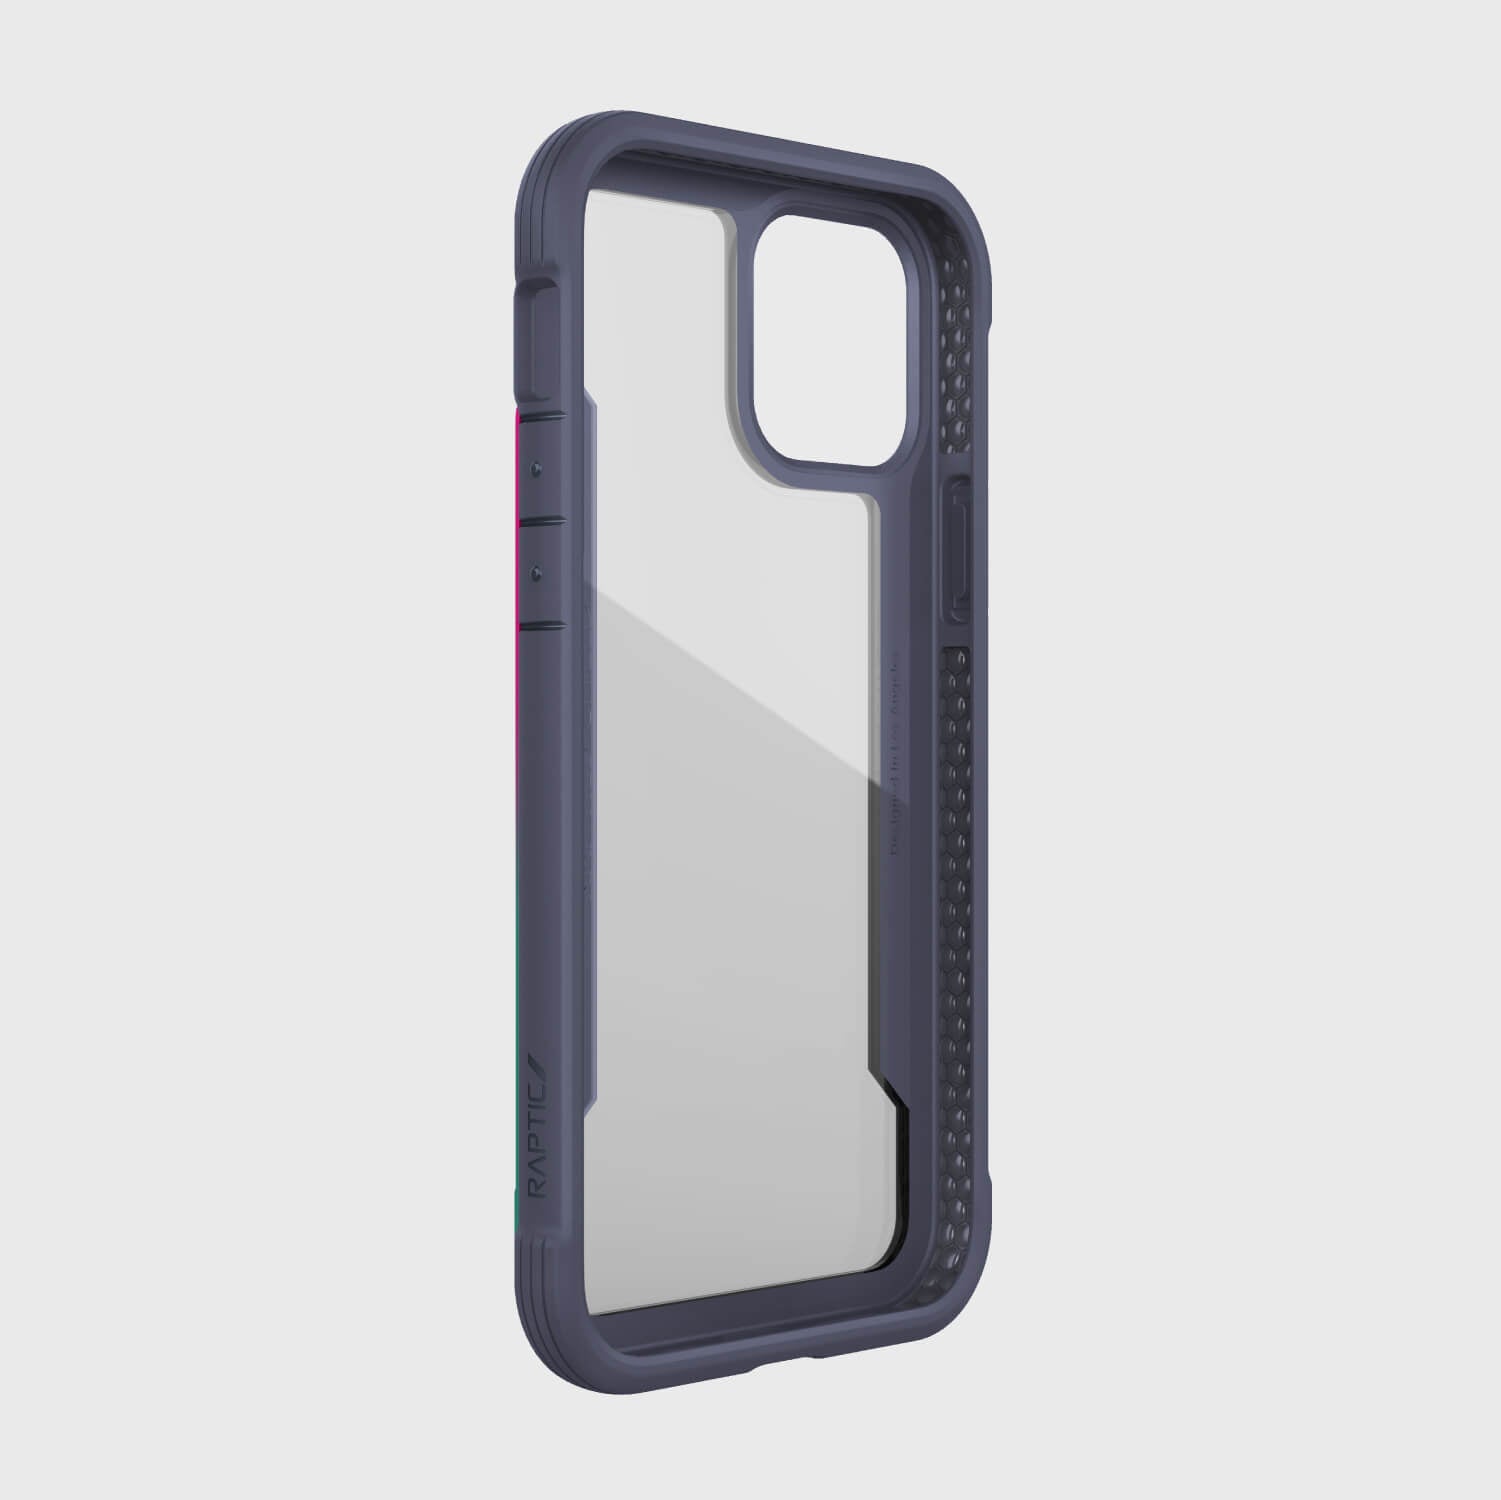 The iPhone 12 Pro Max with the Raptic SHIELD case is displayed, highlighting its foot drop protection.